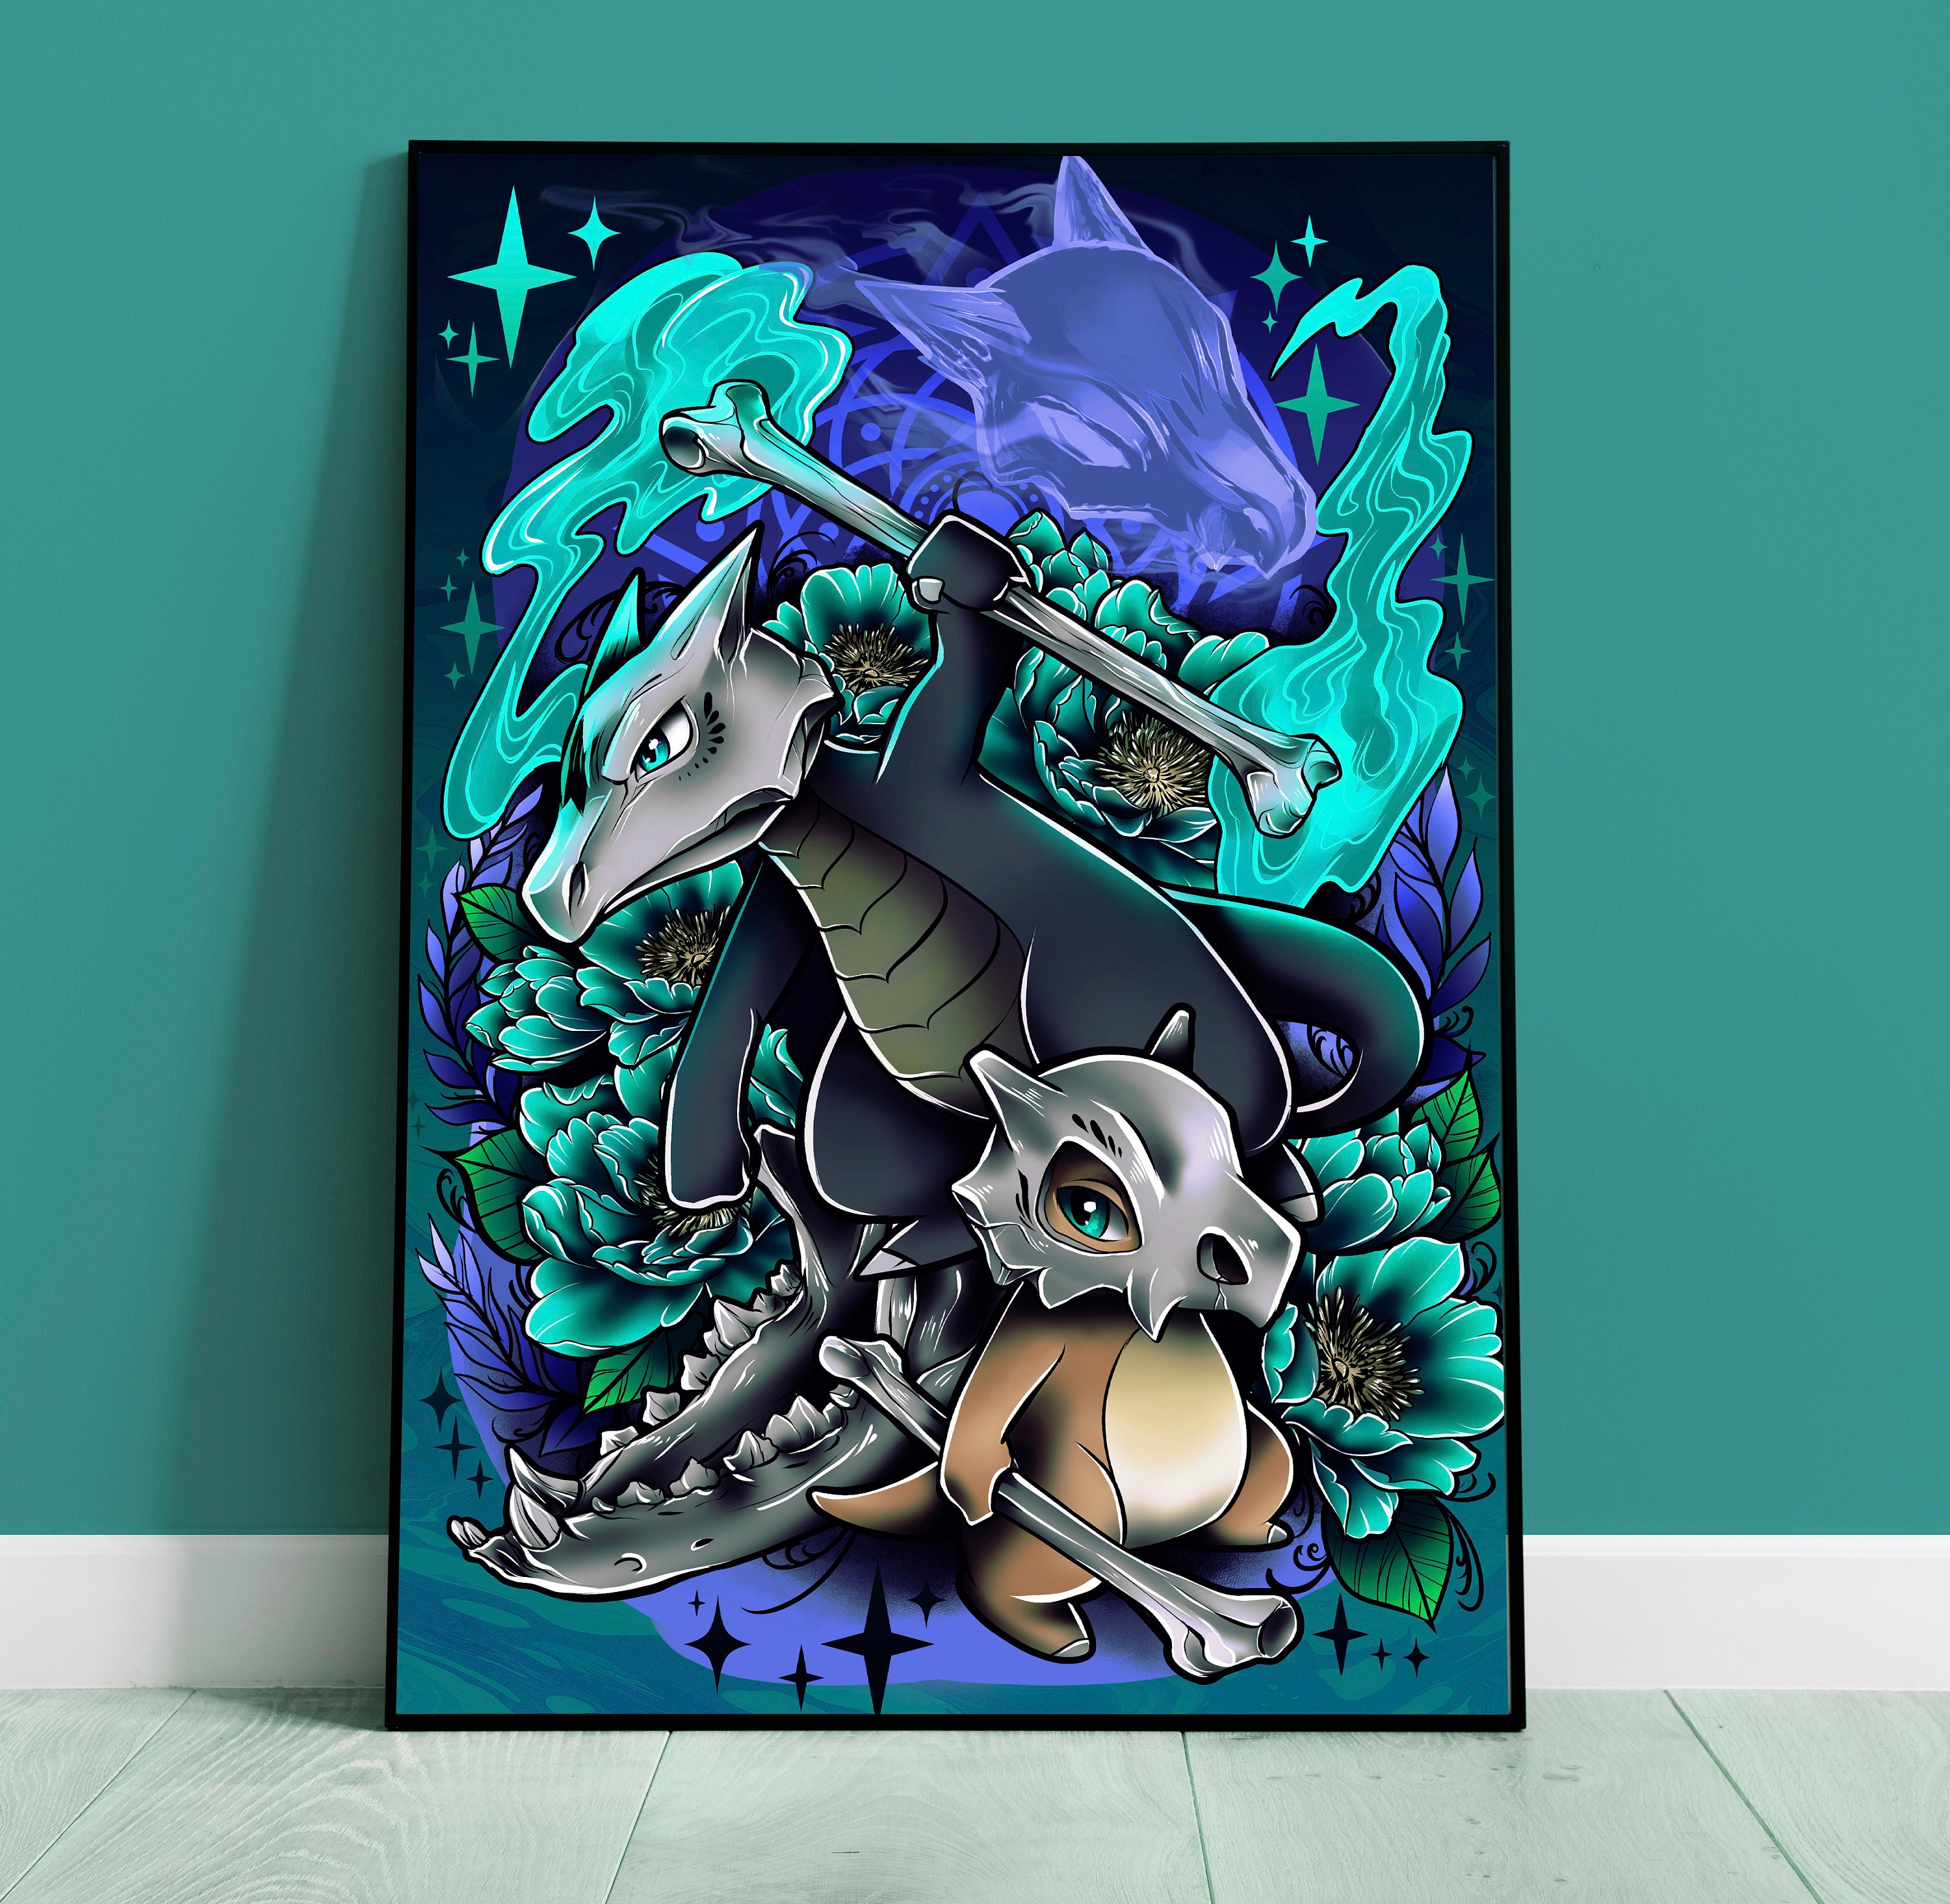 Pokemon Alola Region Video Game Gaming Cool Wall Decor Art Print Poster  22x34 - Poster Foundry